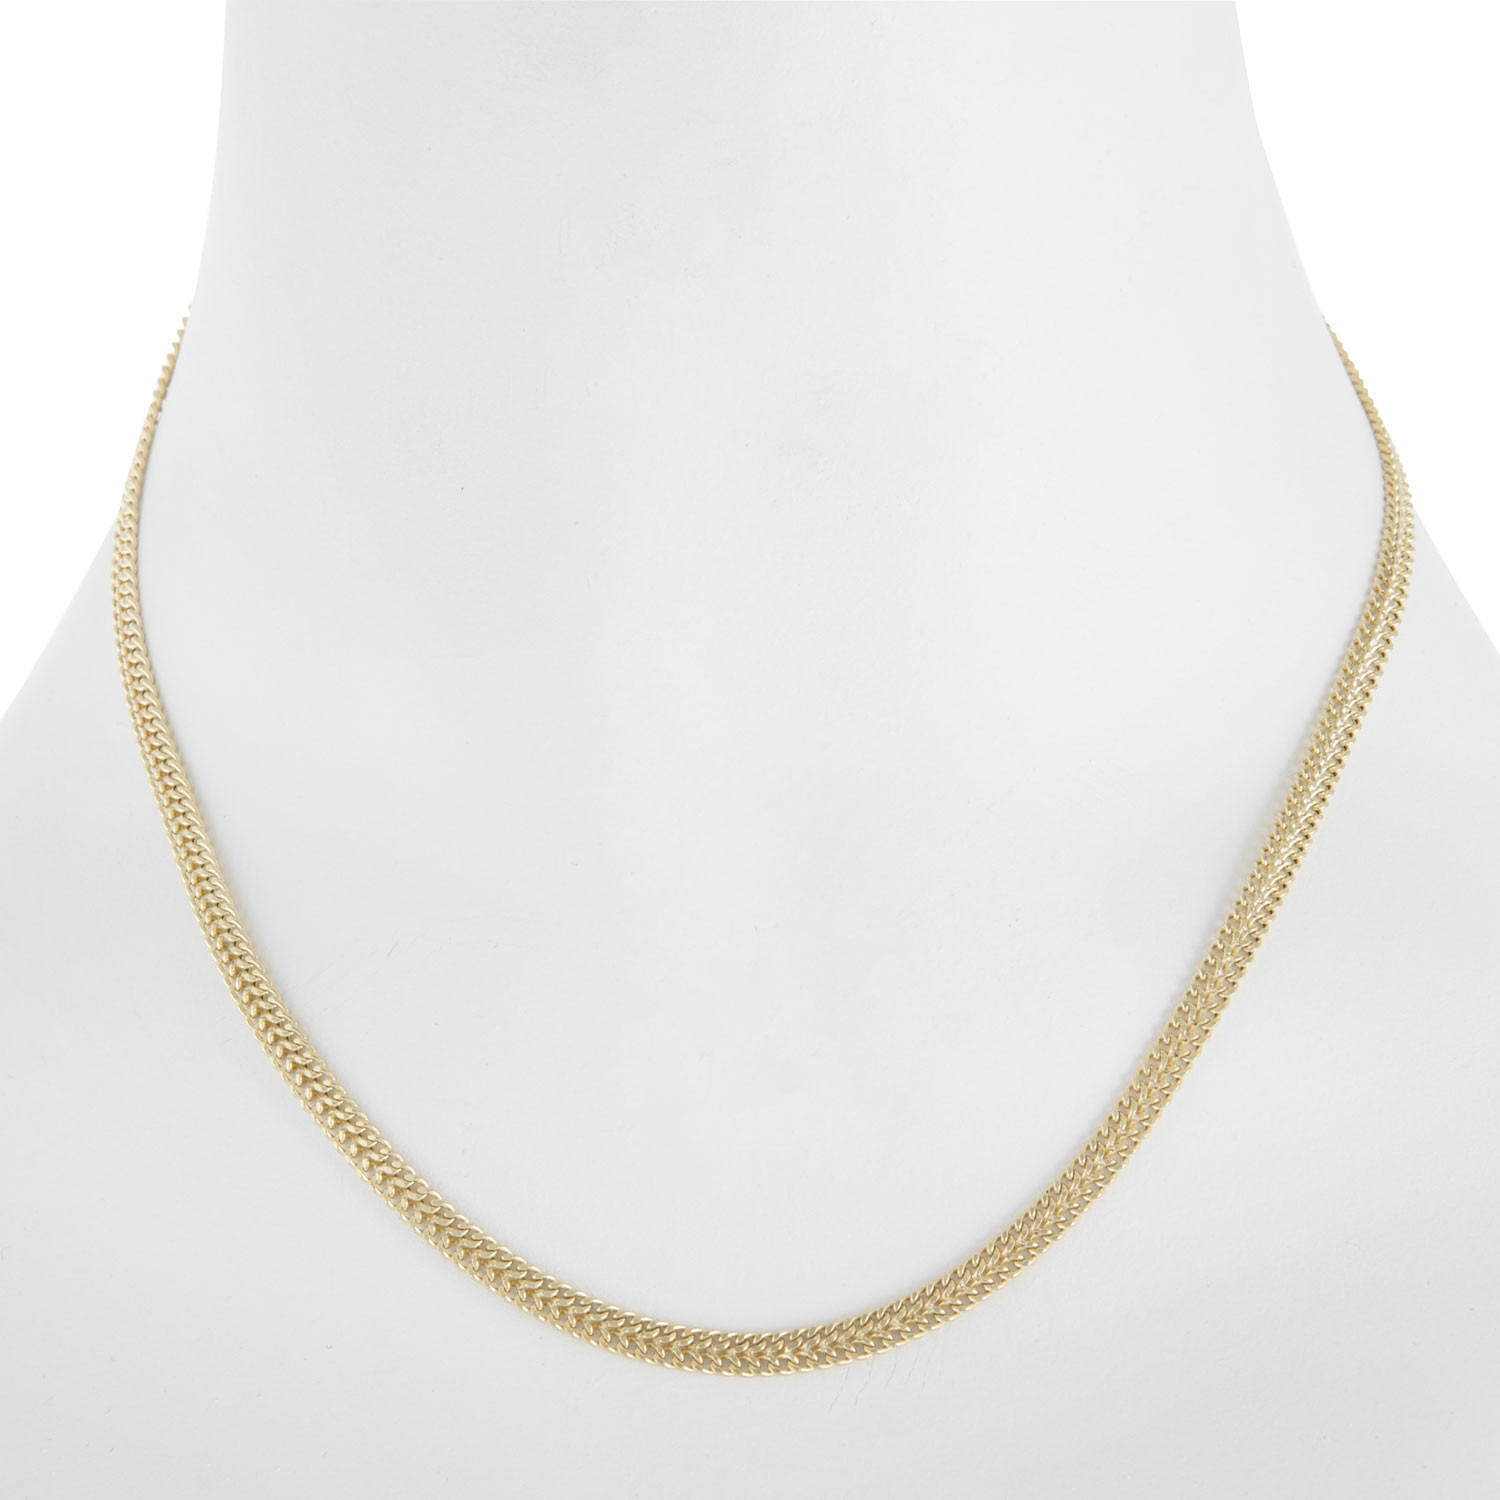 gold chain necklace selection